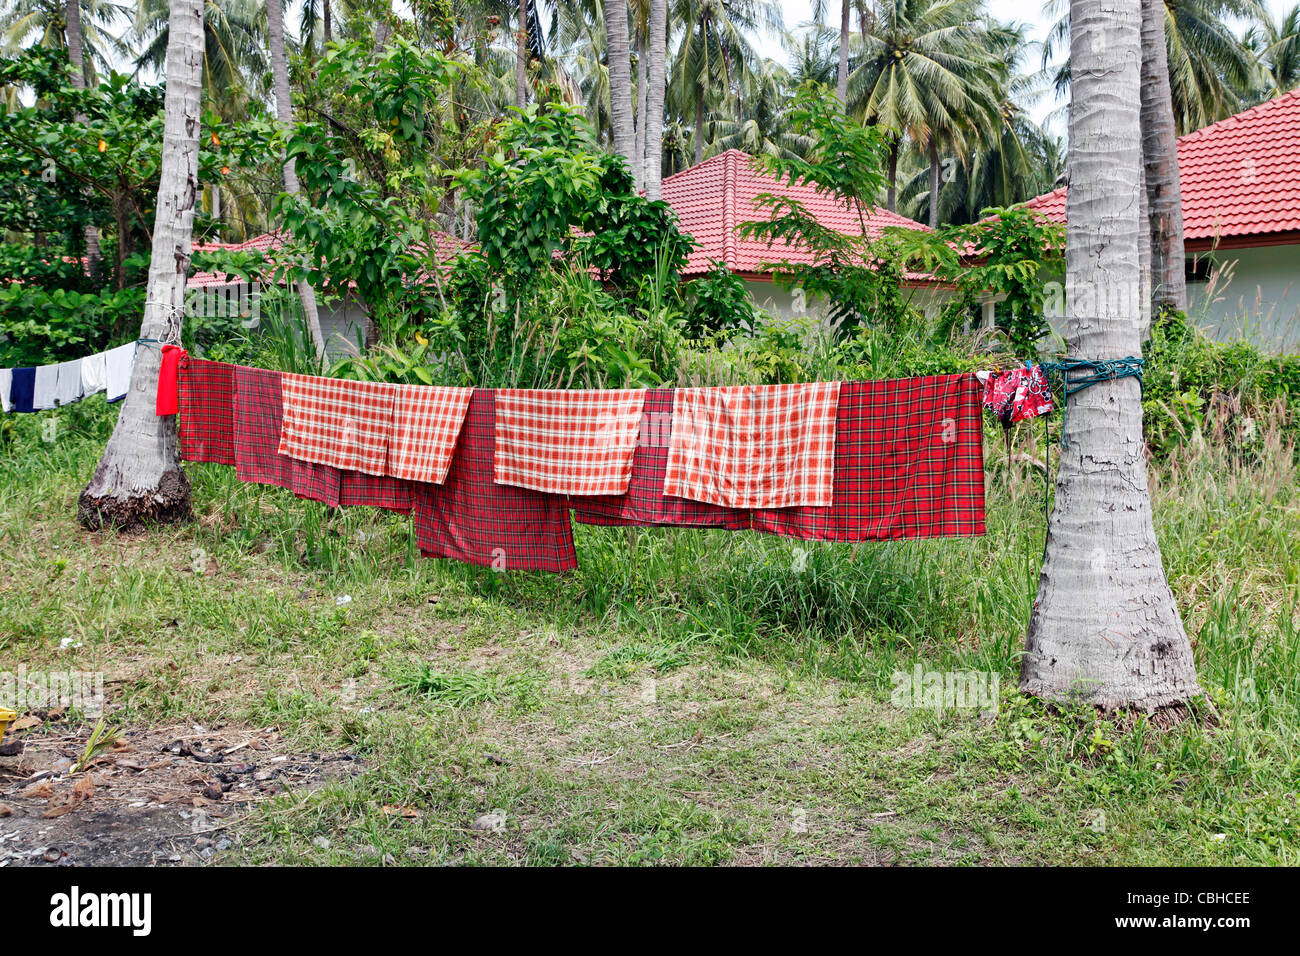 Washing line hanging out to dry between two palm trees on Raya Island, Phuket, Thailand Stock Photo